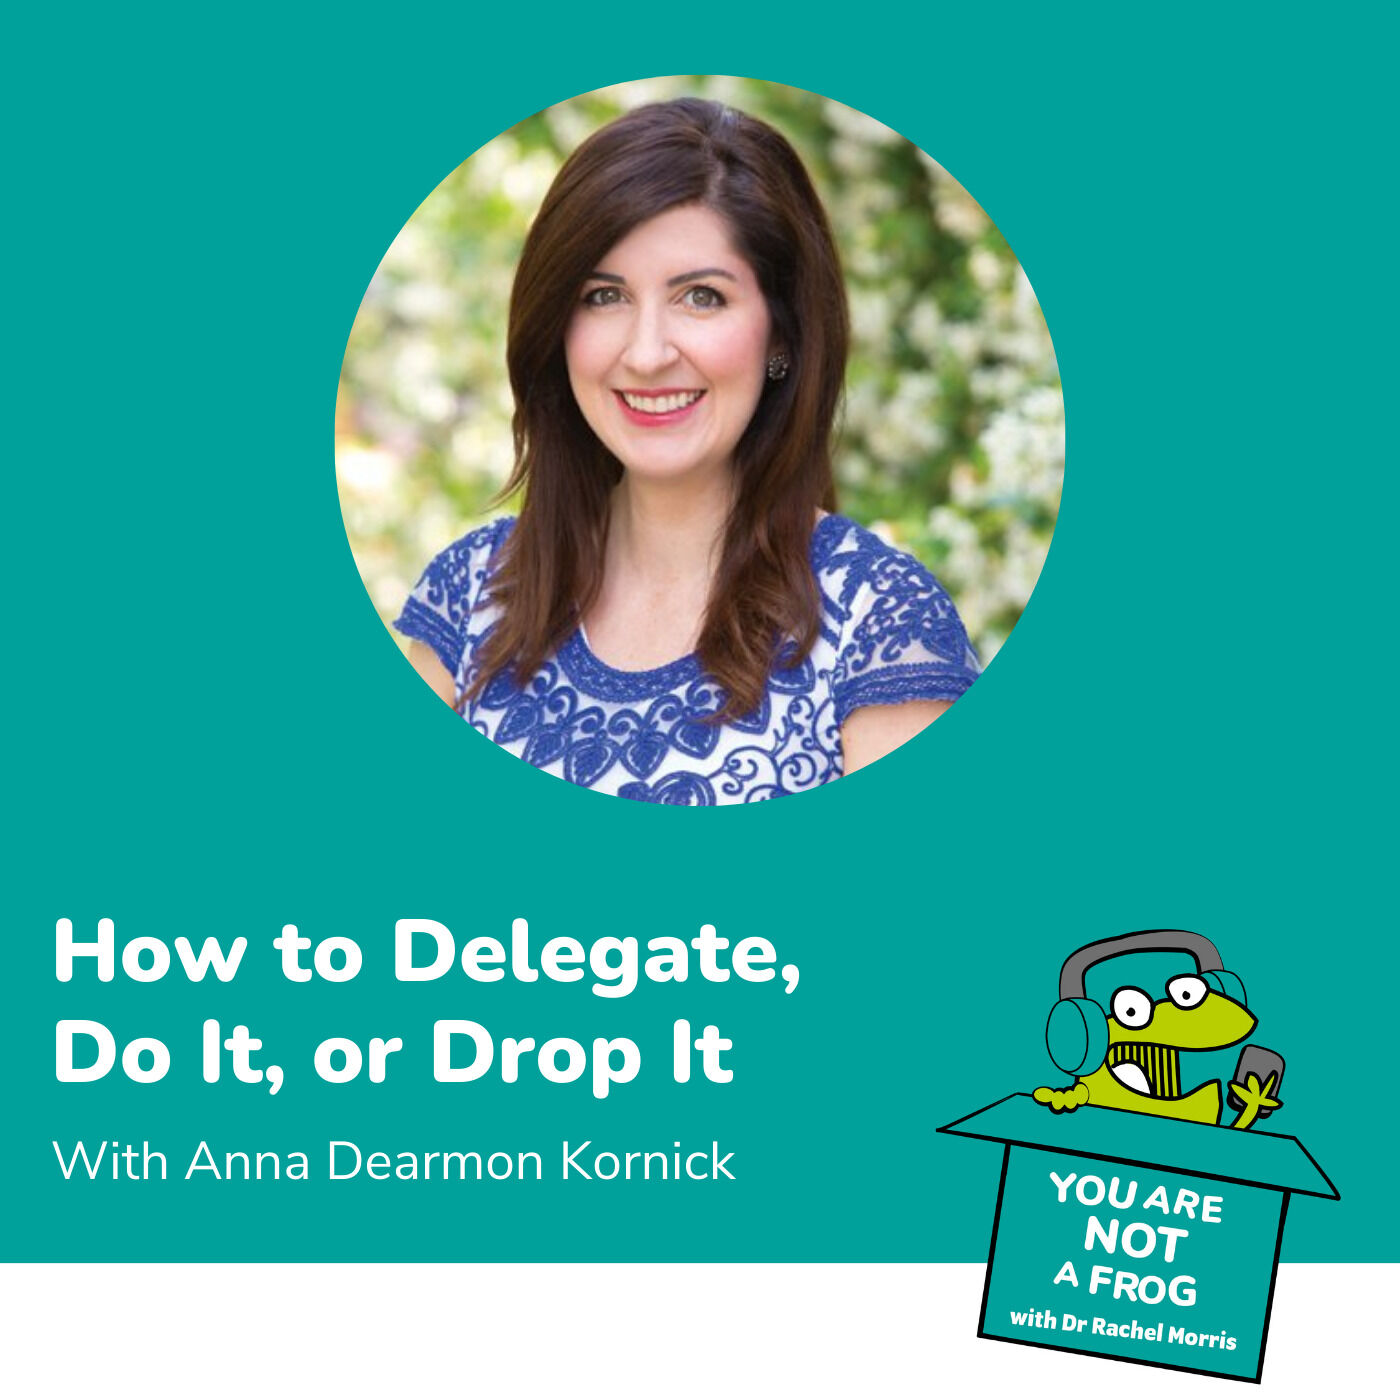 How to Delegate, Do it, or Drop it with Anna Dearmon Kornick